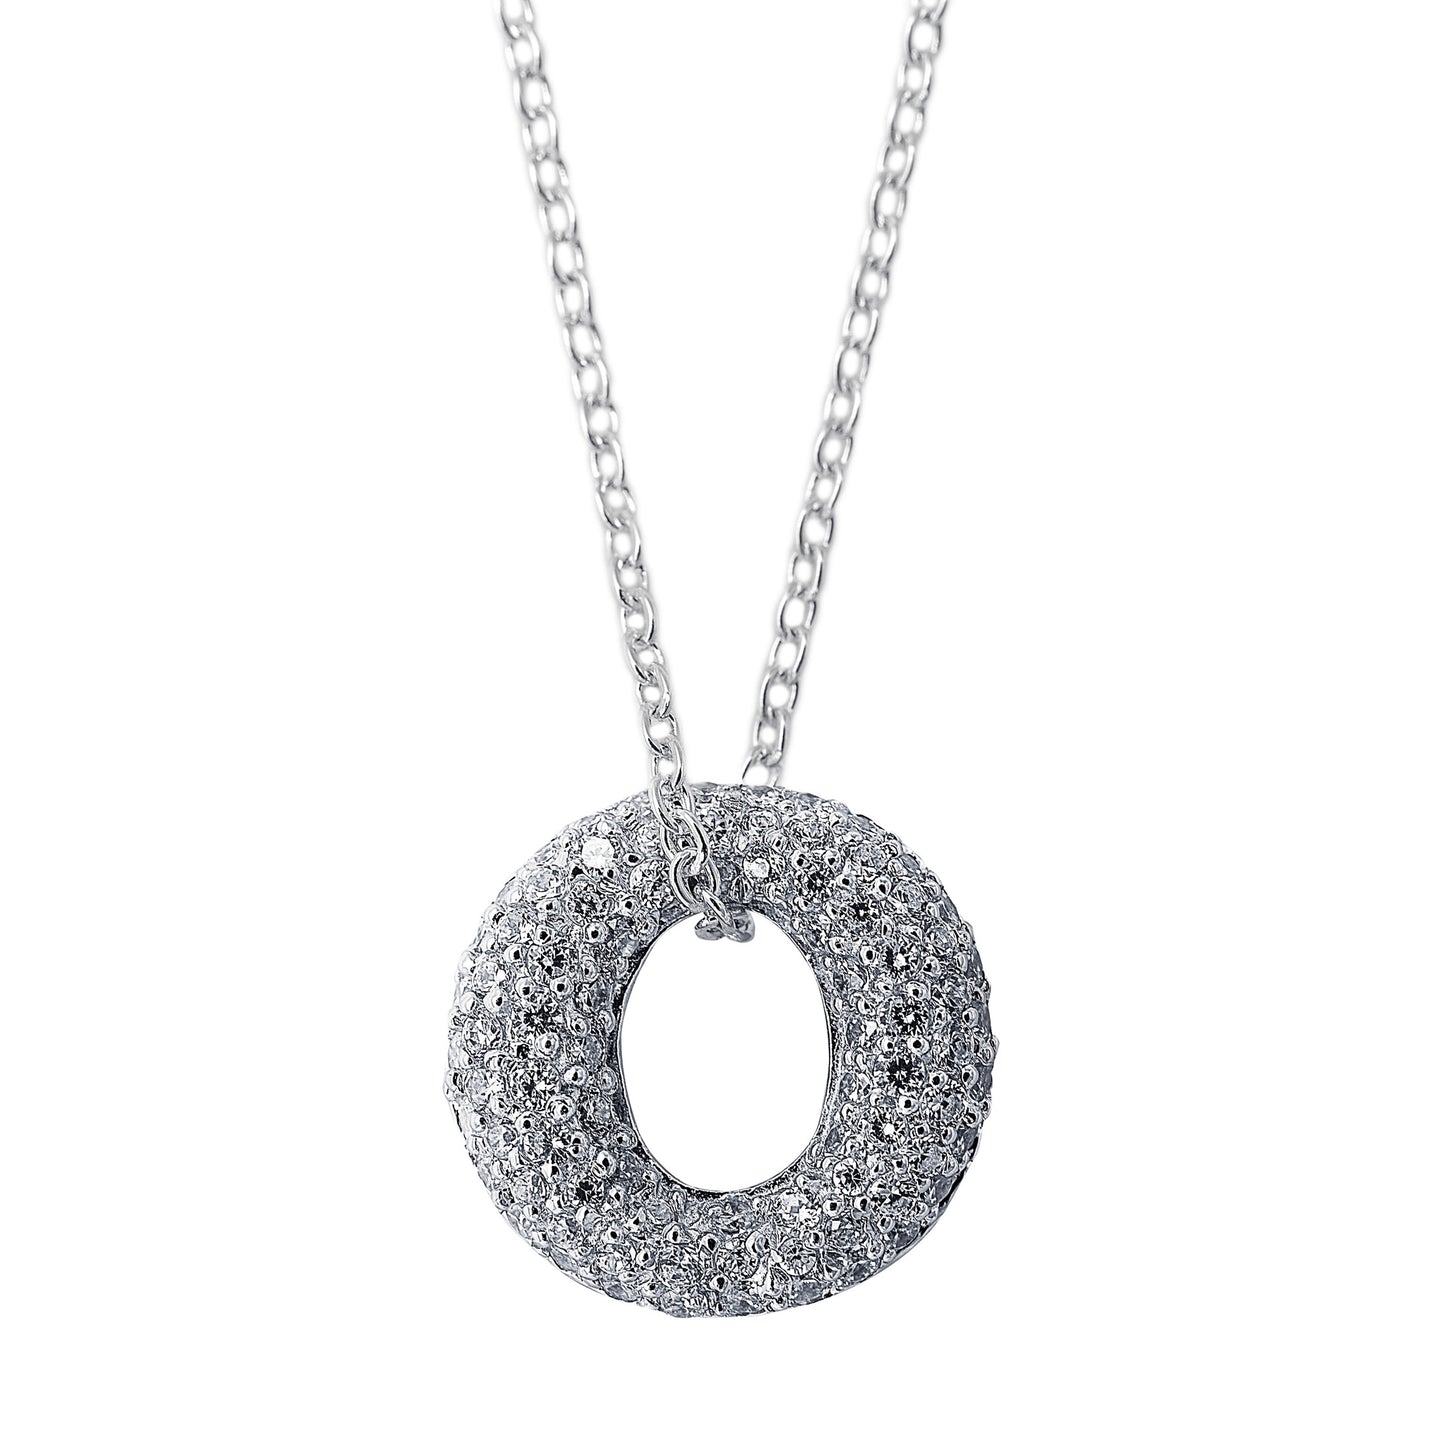 Lana Me Necklace, O Shape Pendant, in 925 Sterling Silver with Cubic Zirconia Stones on one side and plain silver on the other for different looks. Worldwide shipping. Affordable luxury jewellery by Bellagio & Co.